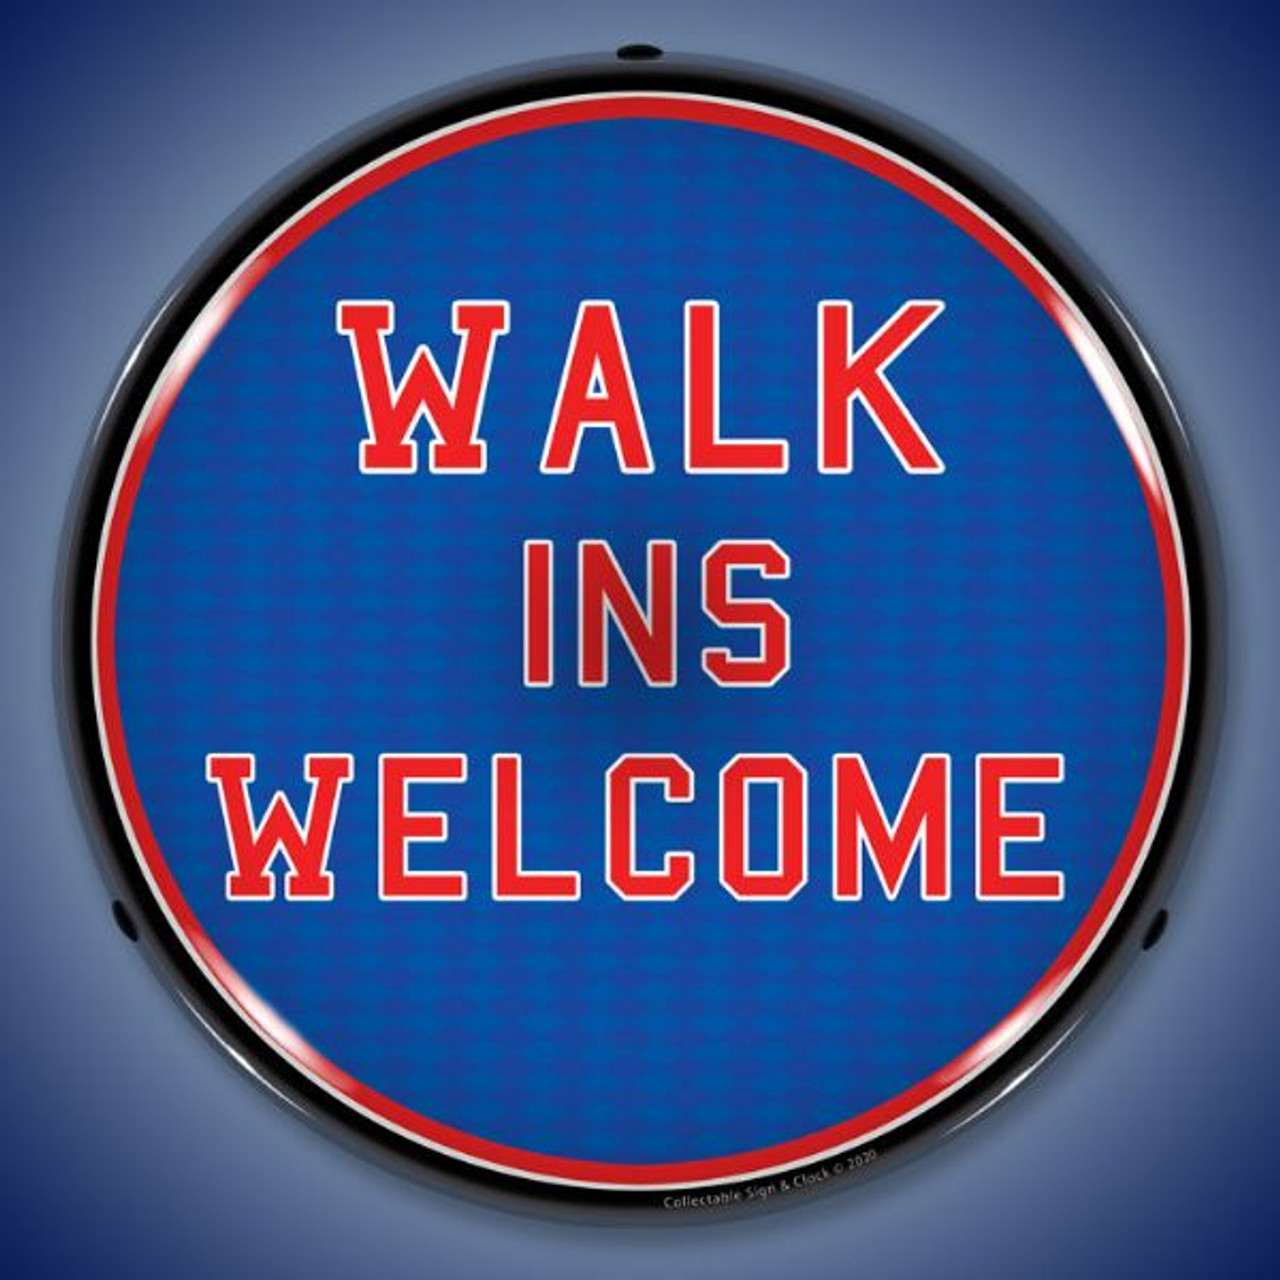 Walk Ins Welcome LED Lighted Business Sign 14 x 14 Inches